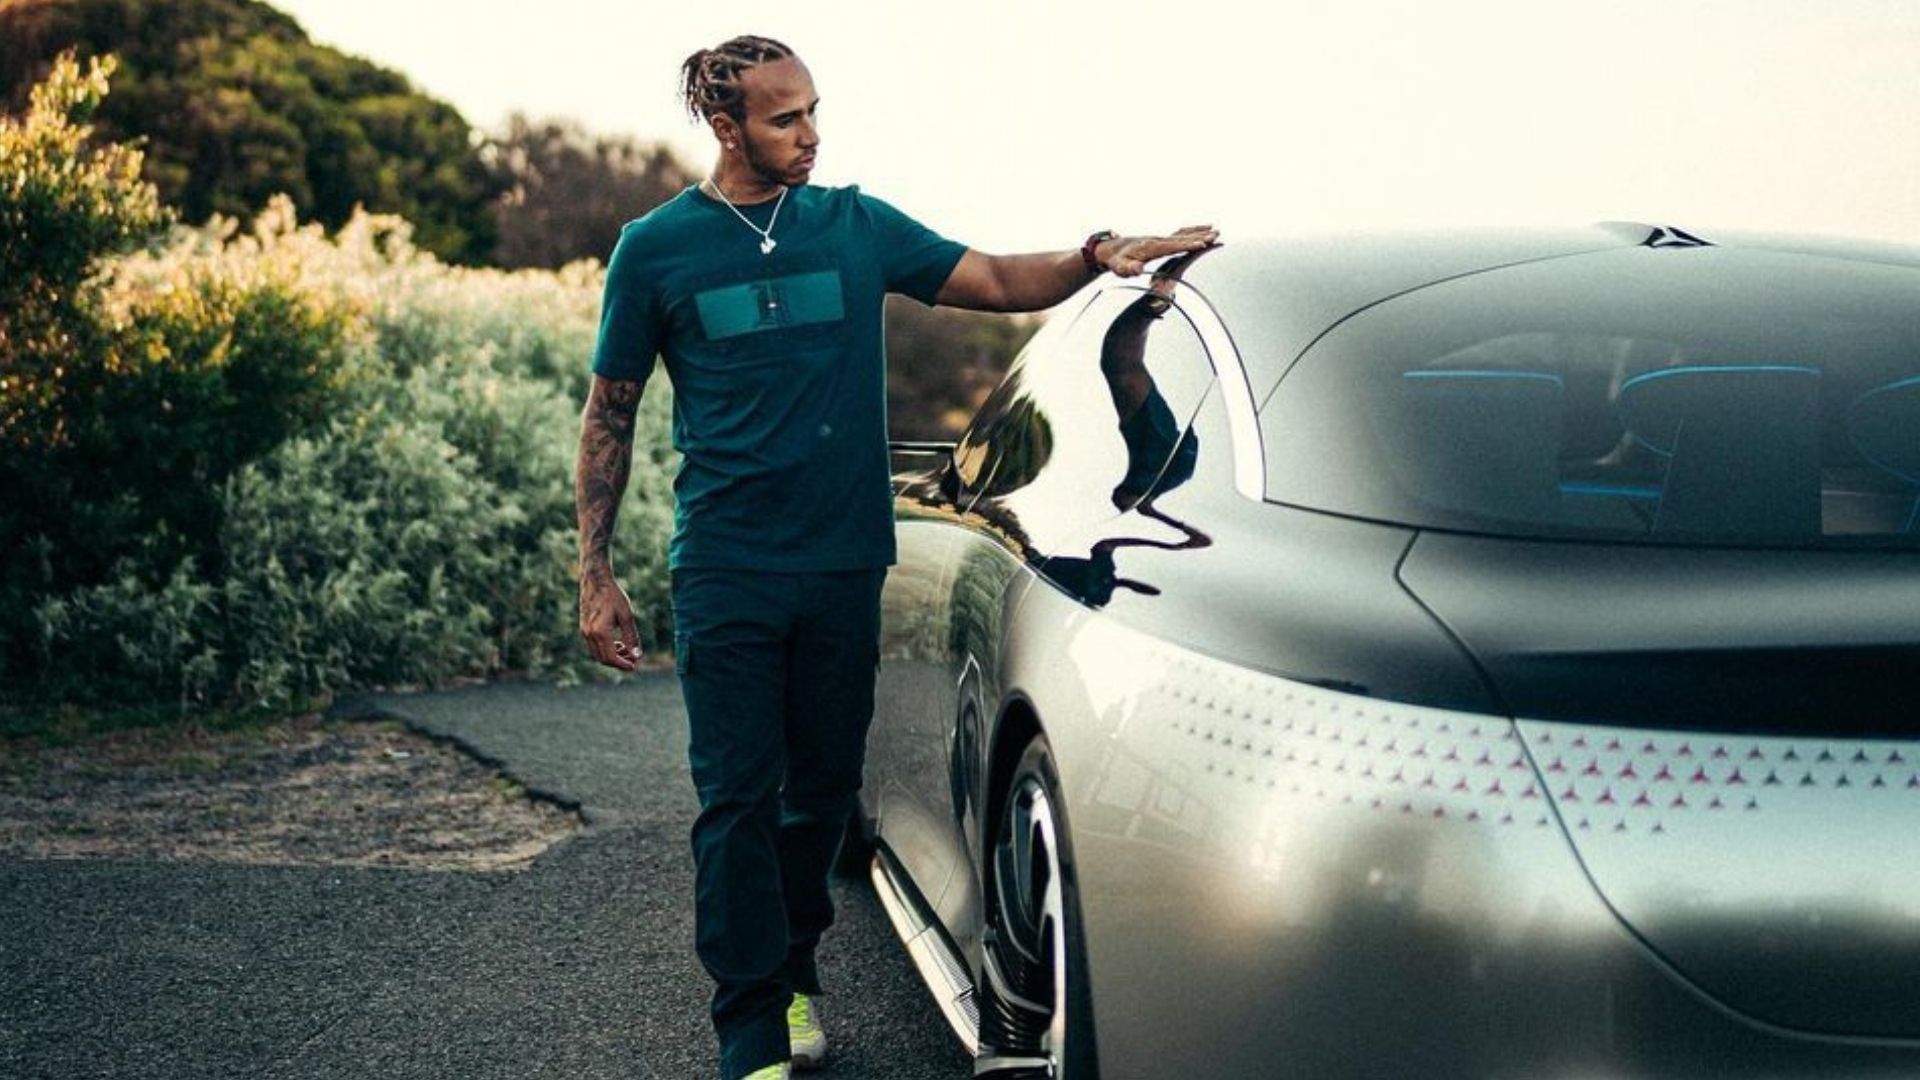 Lewis Hamilton Is Letting His Car Collection Sit For The Environment.